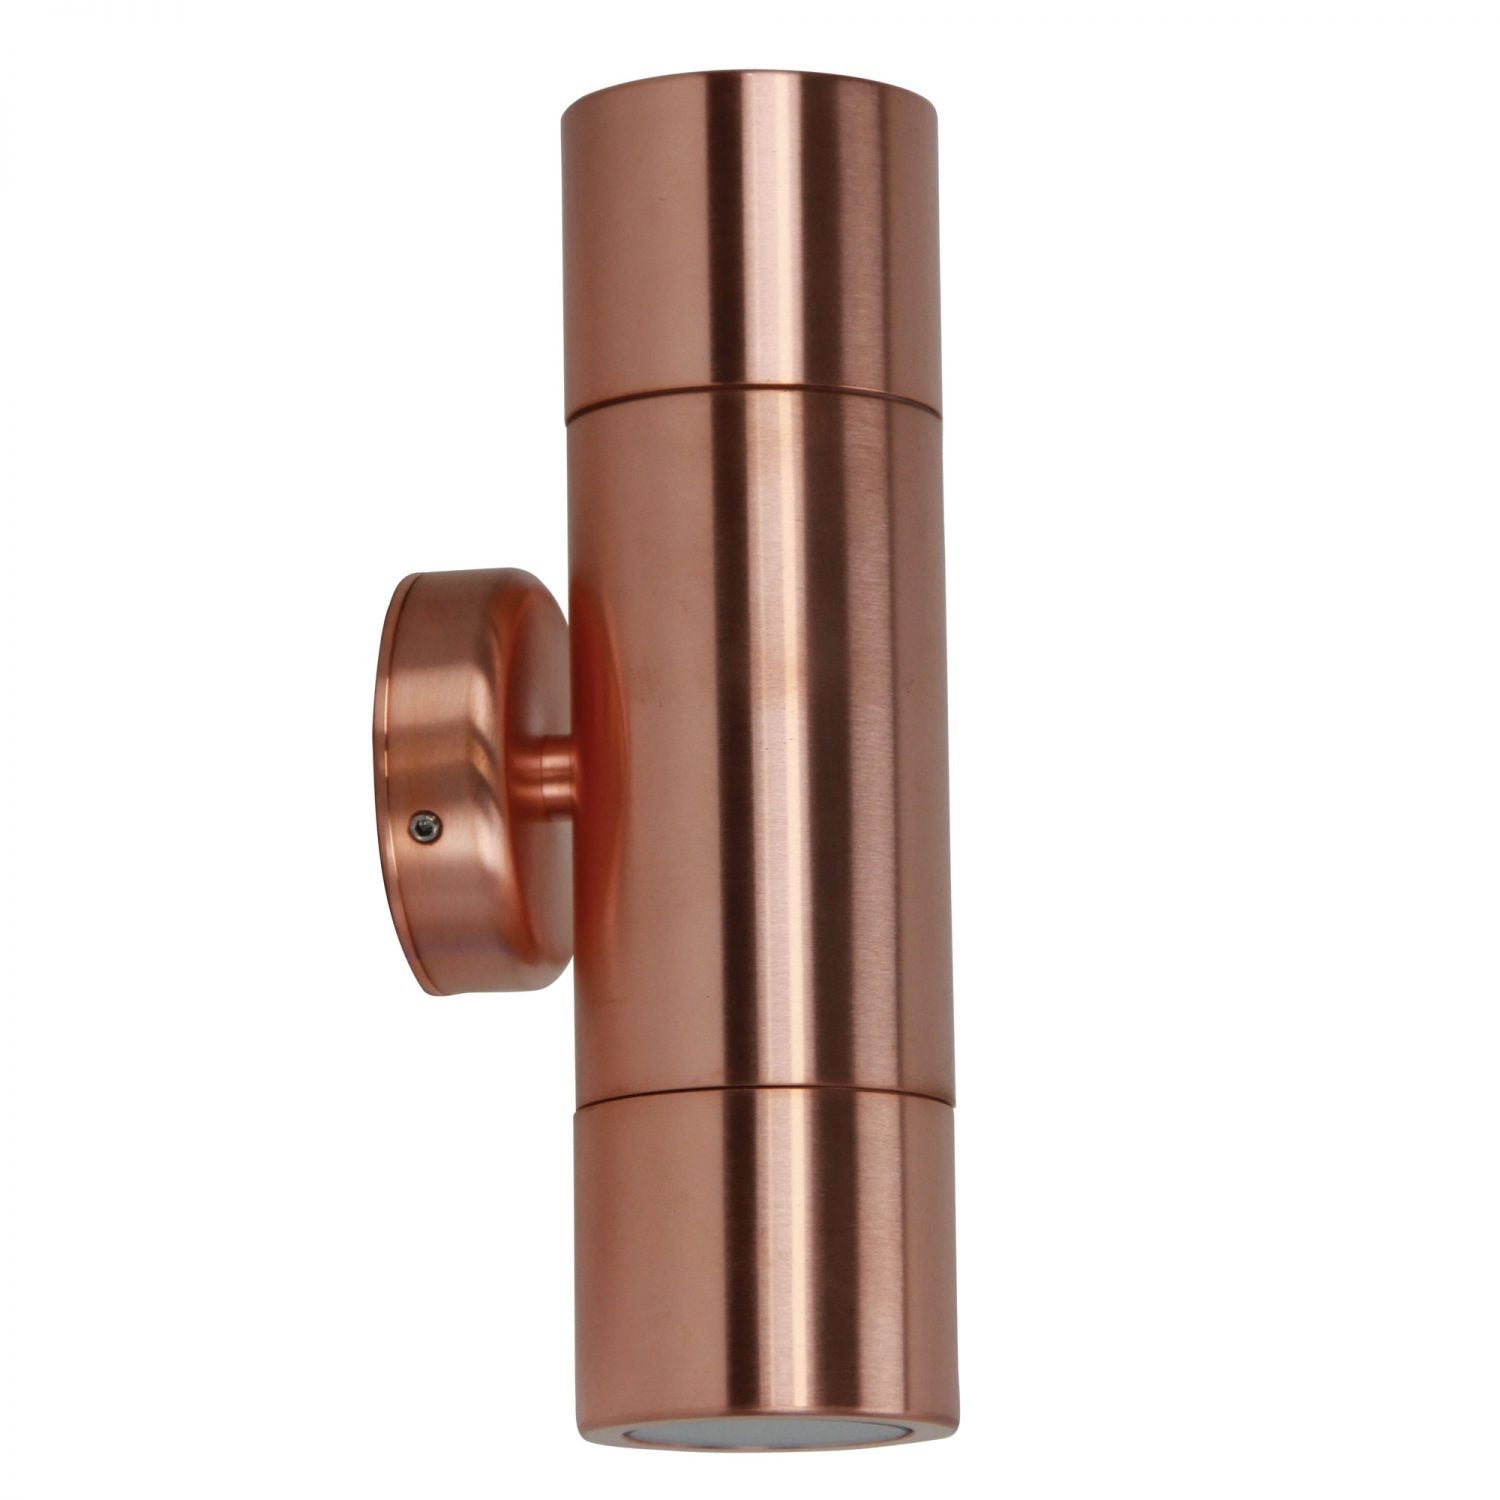 Oxley Up-Down Wall Light Copper - UA7786CO